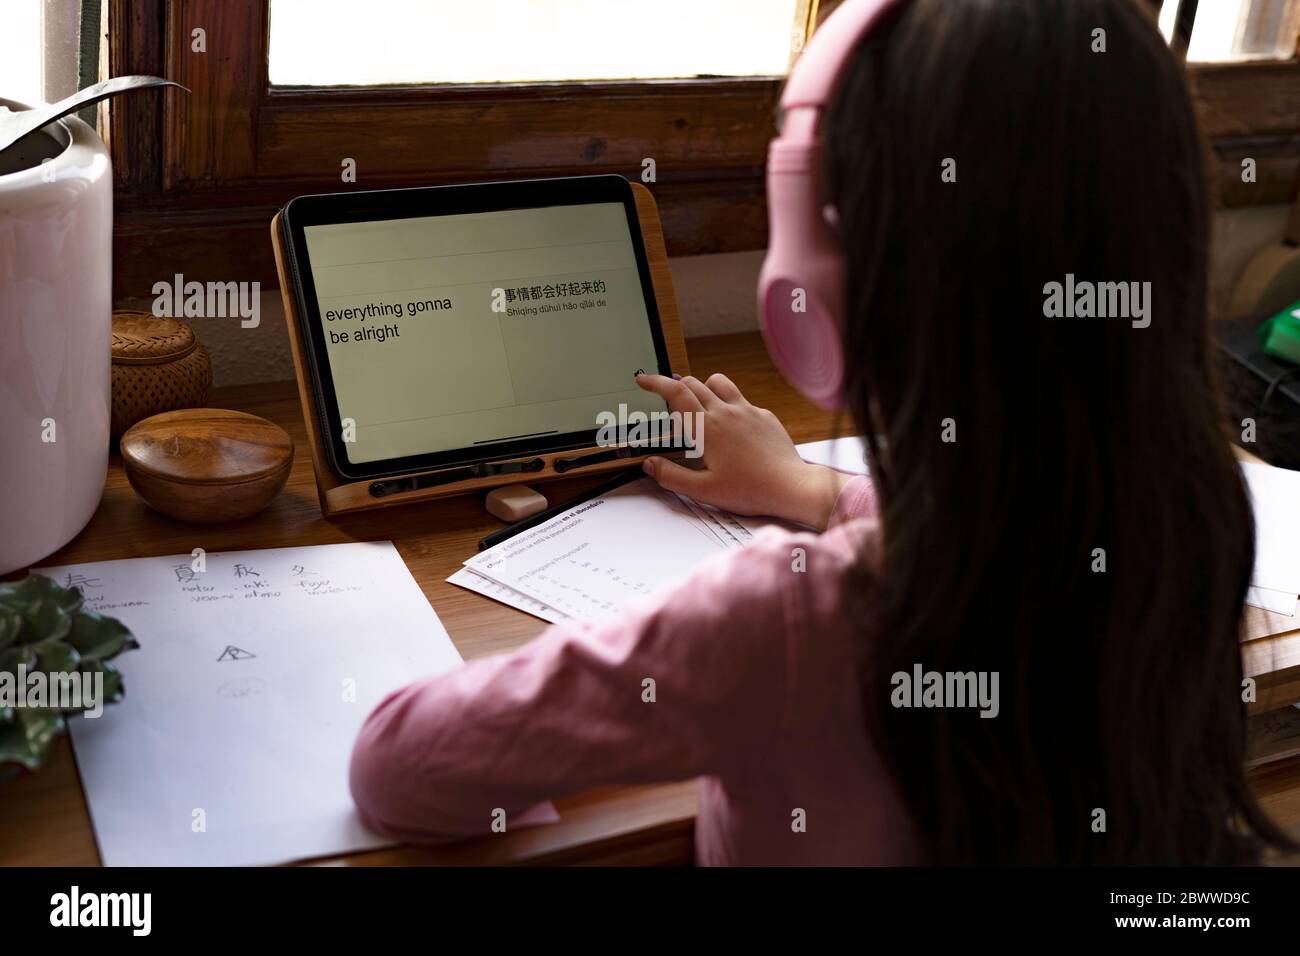 Girl wearing headphones translating languages on digital tablet while learning comics at home Stock Photo